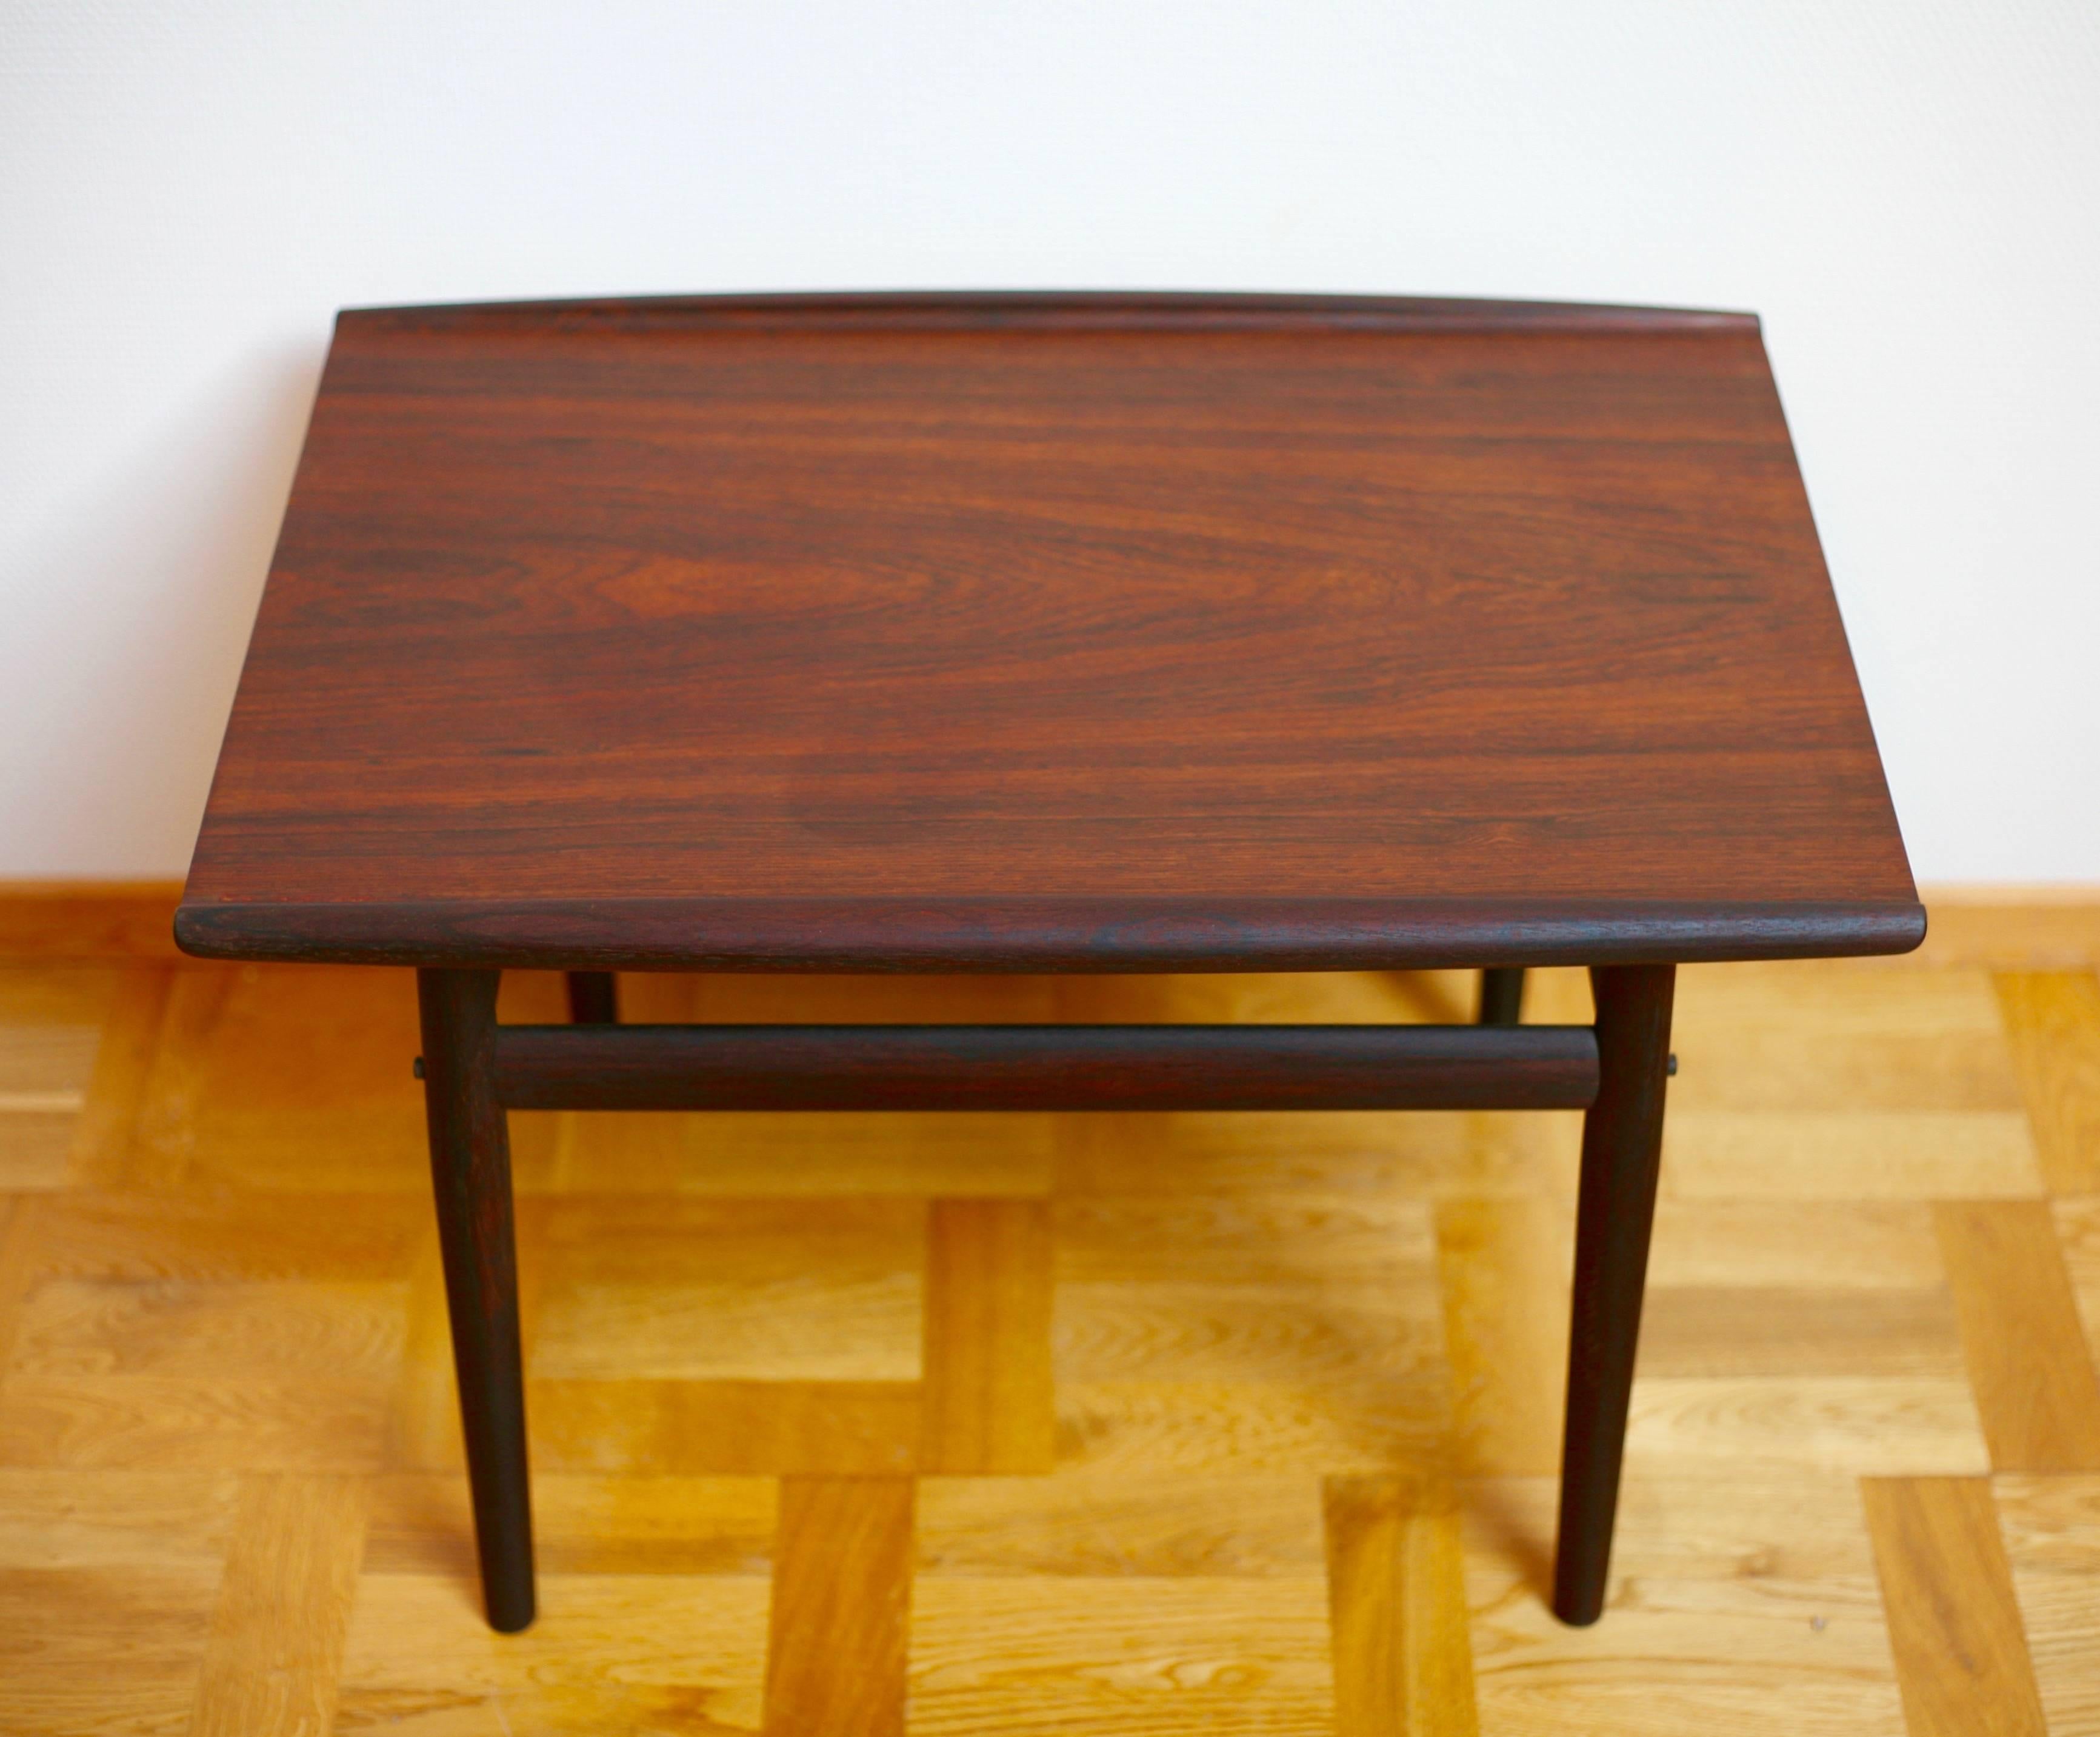 Rosewood coffee table by Danish designer Grete Jalk for Glostrup furniture (Möbelfabrik), circa 1960. Raised band and signed on foil label with Danish Control mark.